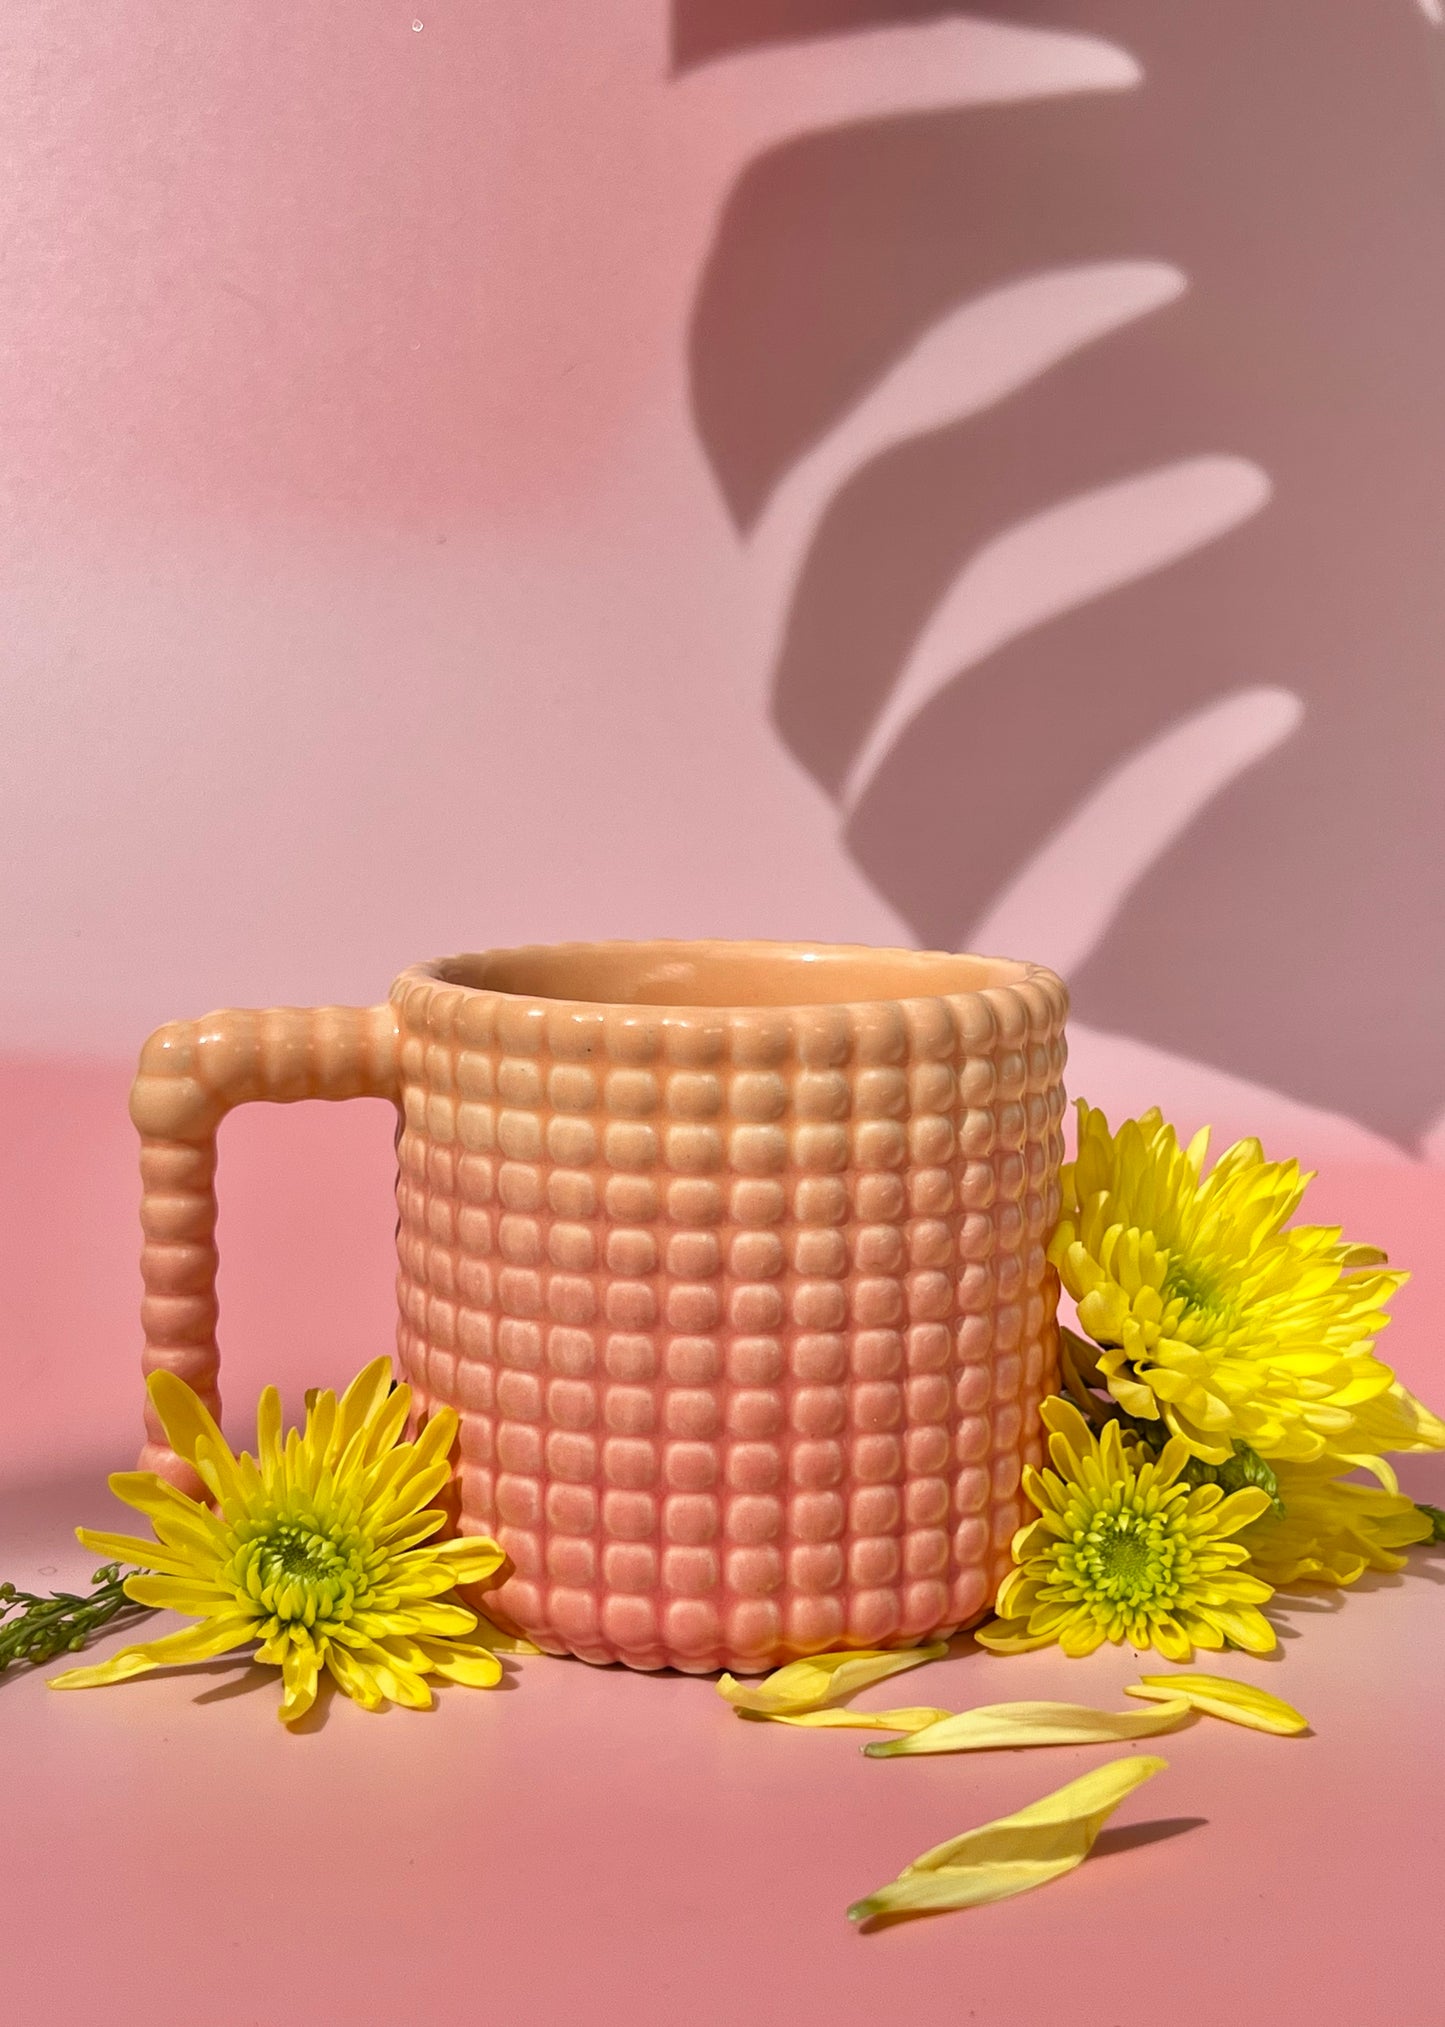 ♥PREORDER♥ Gozarian Mug with Big Dimple Texture in Peach Pink Fade